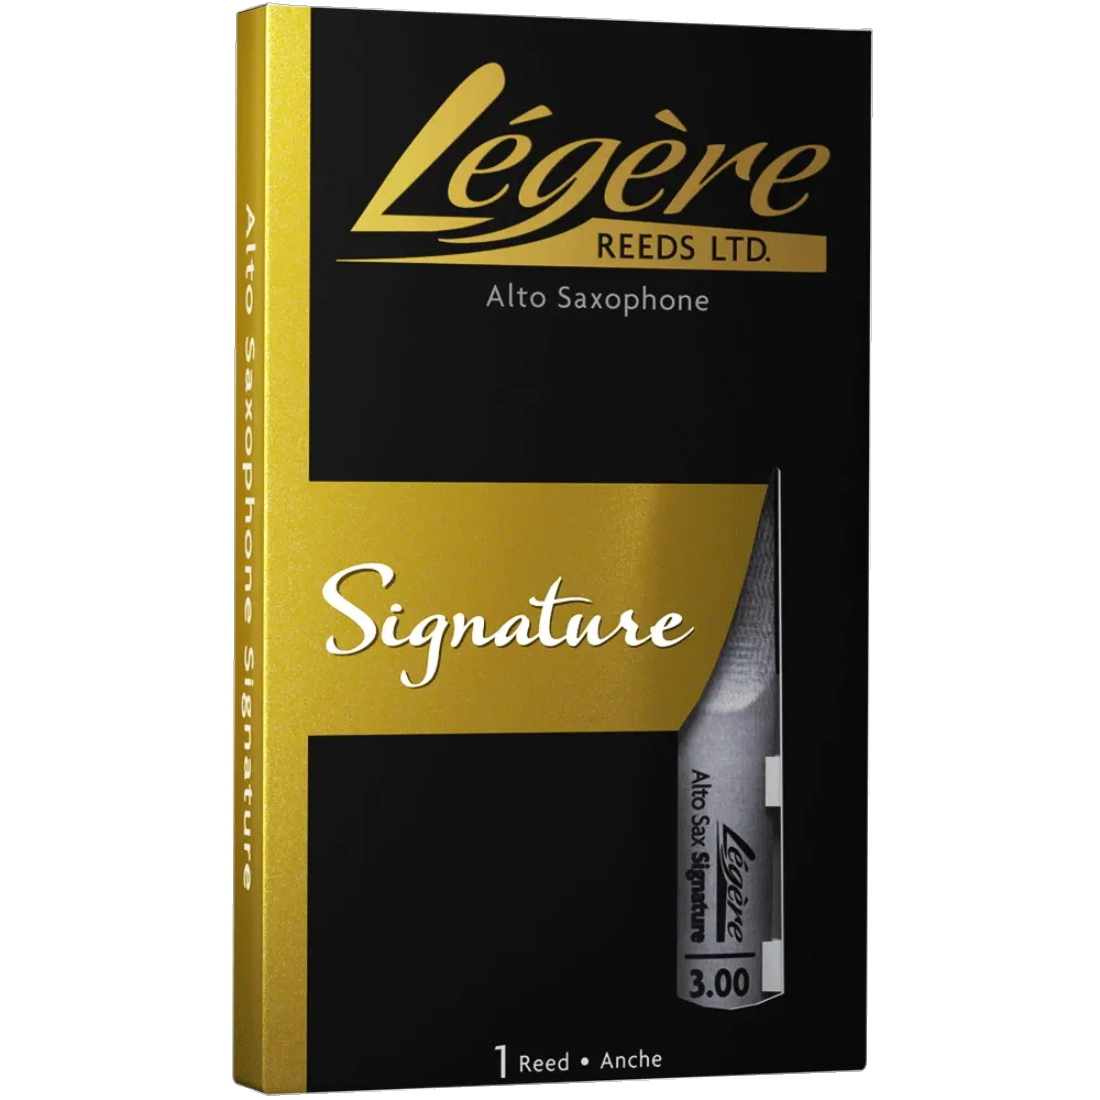 Black and yellow box of signature Legere synthetic alto sax reeds